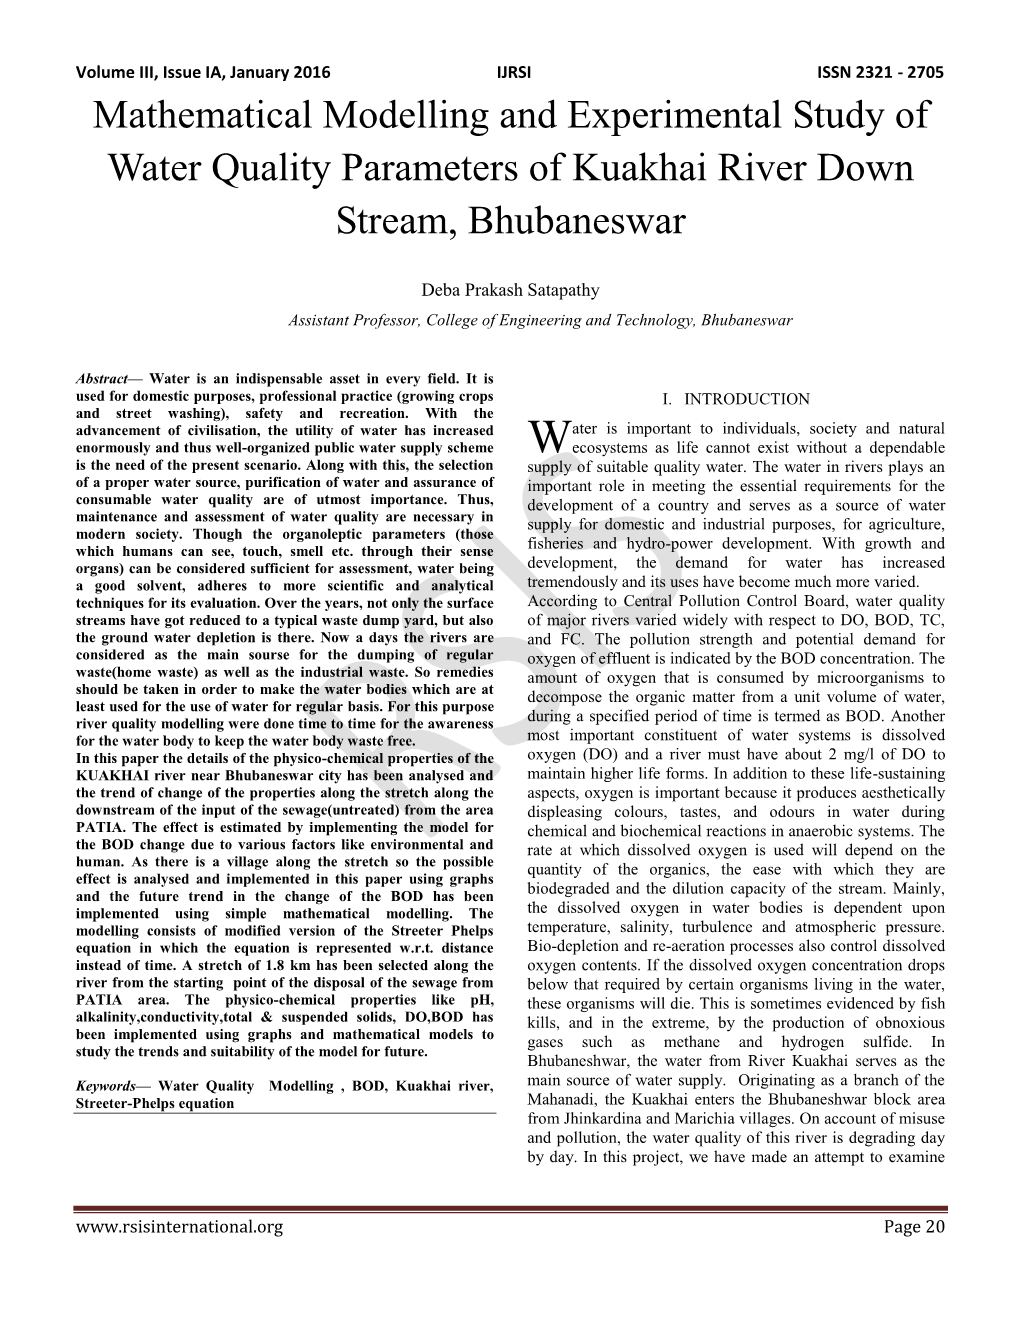 Mathematical Modelling and Experimental Study of Water Quality Parameters of Kuakhai River Down Stream, Bhubaneswar